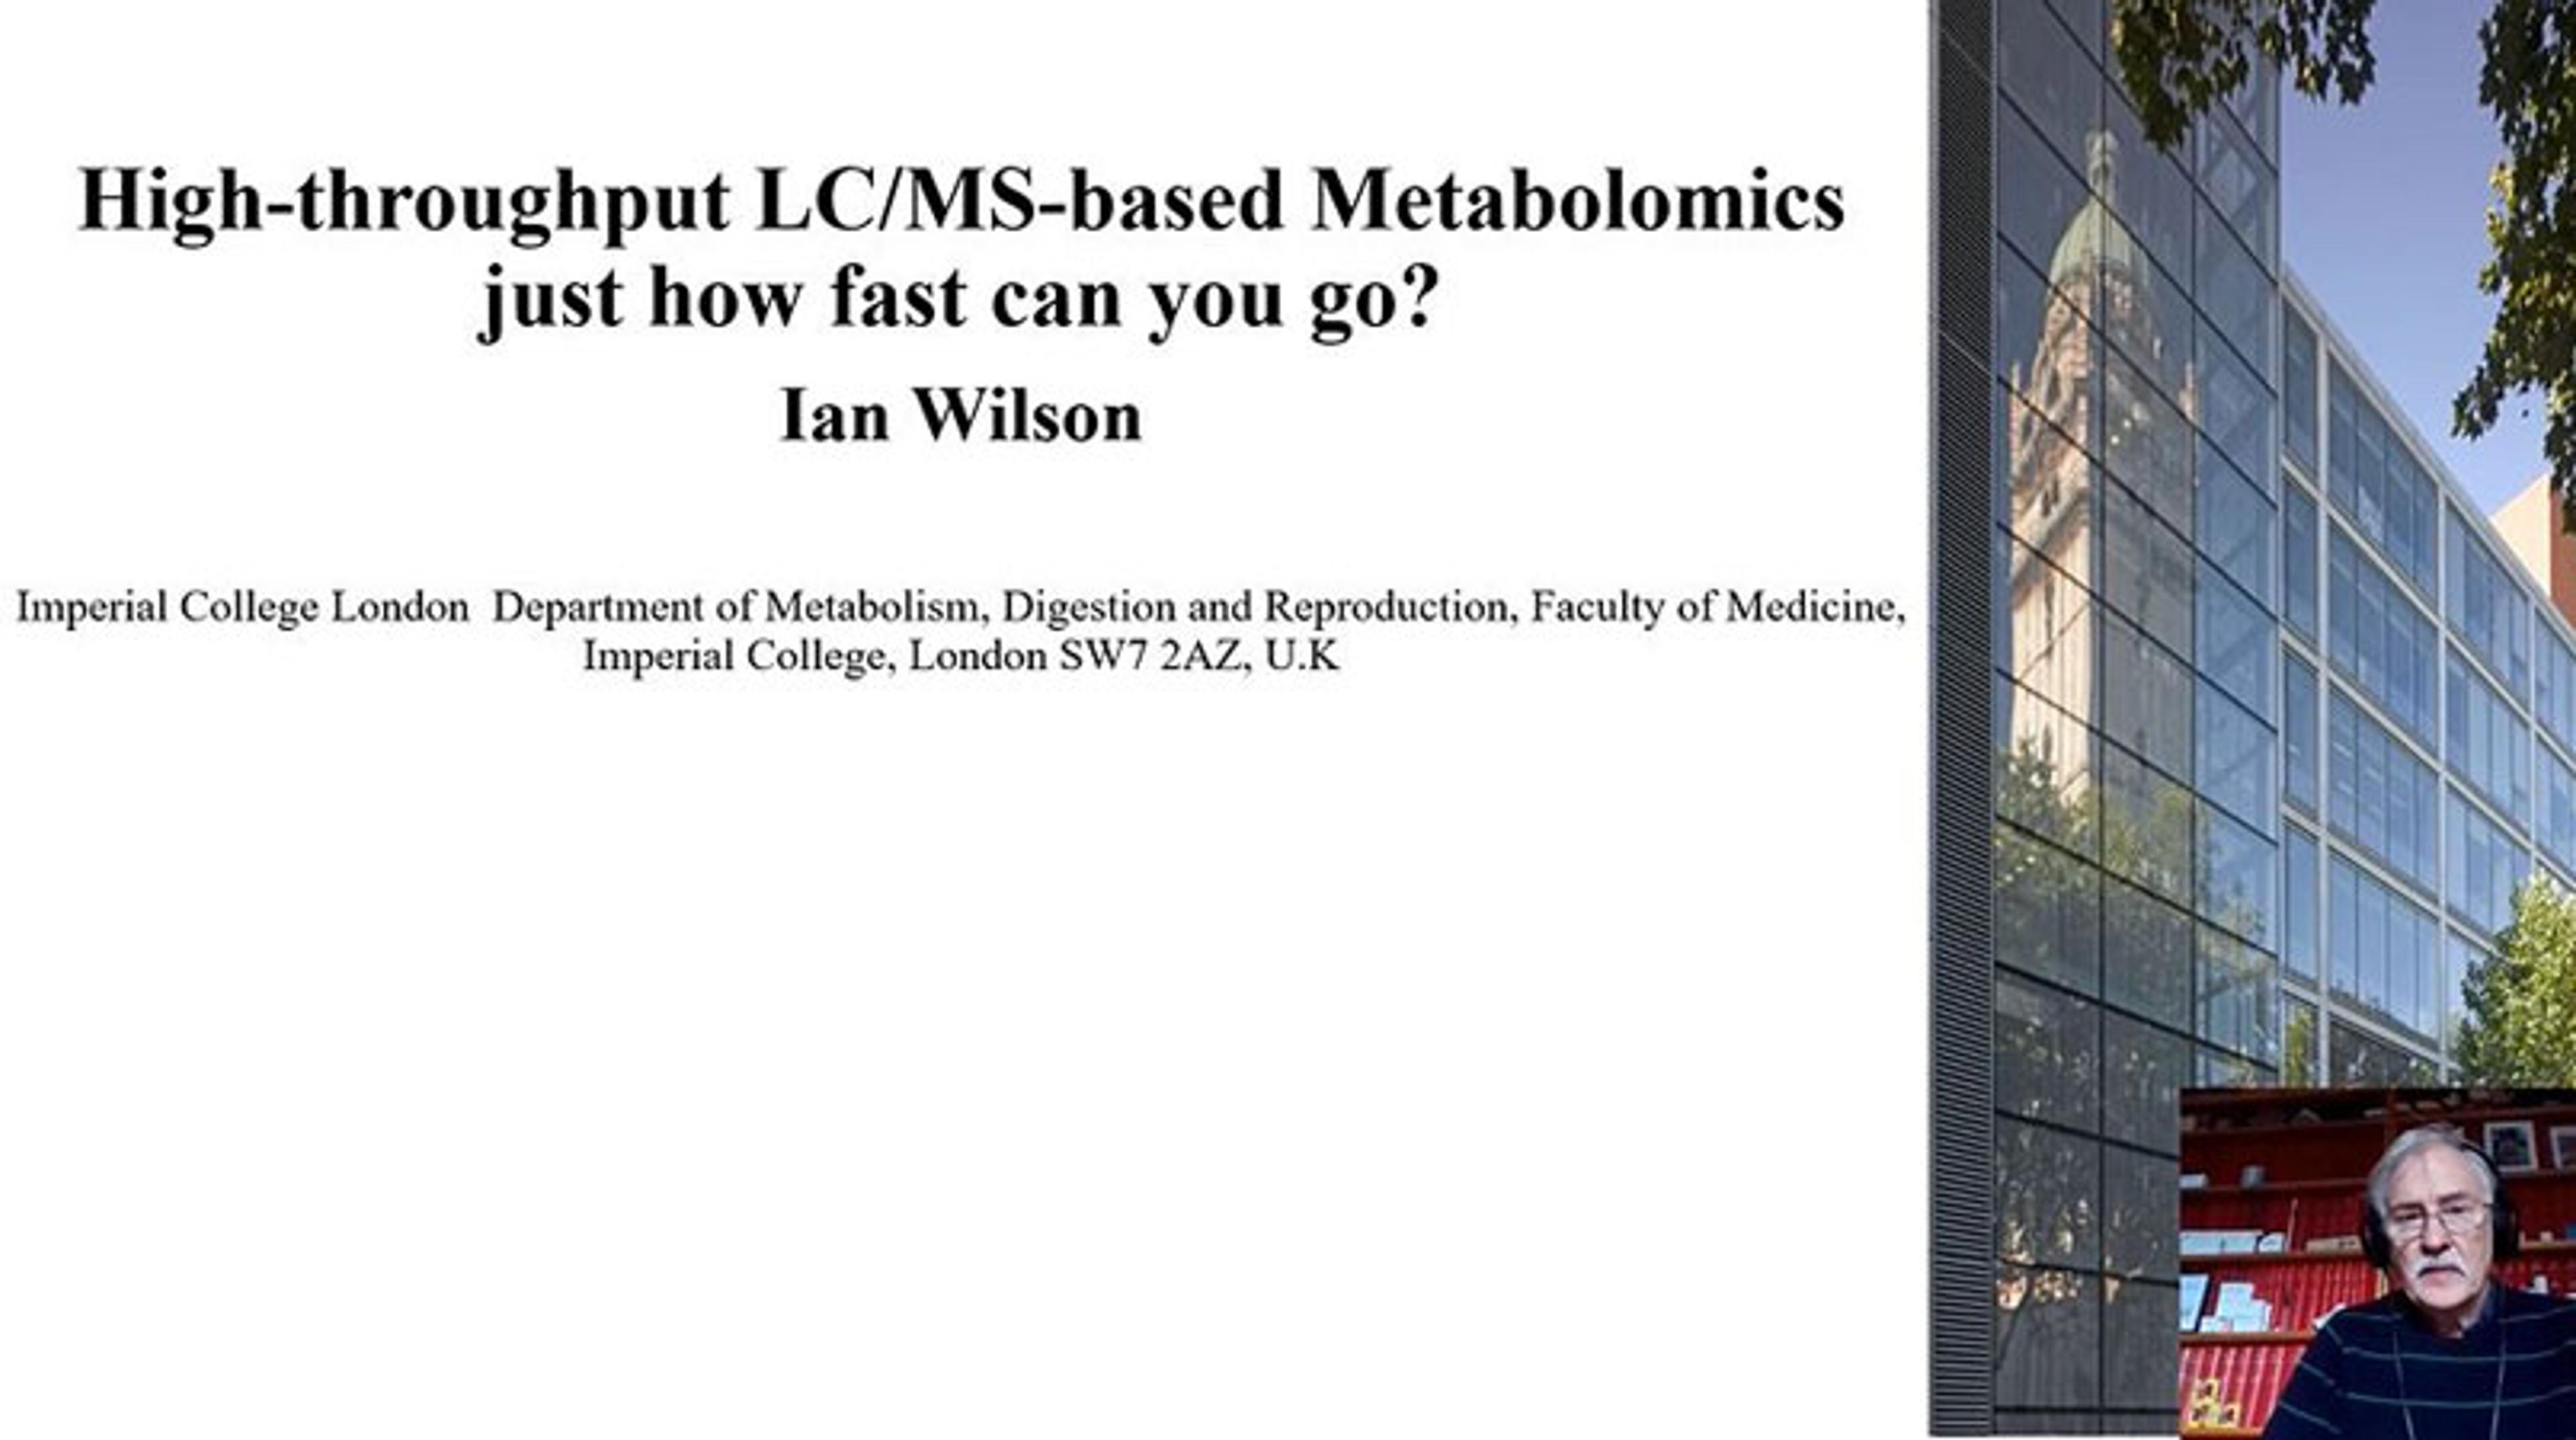 High-throughput LC/MS-based metabolomics – just how fast can you go?